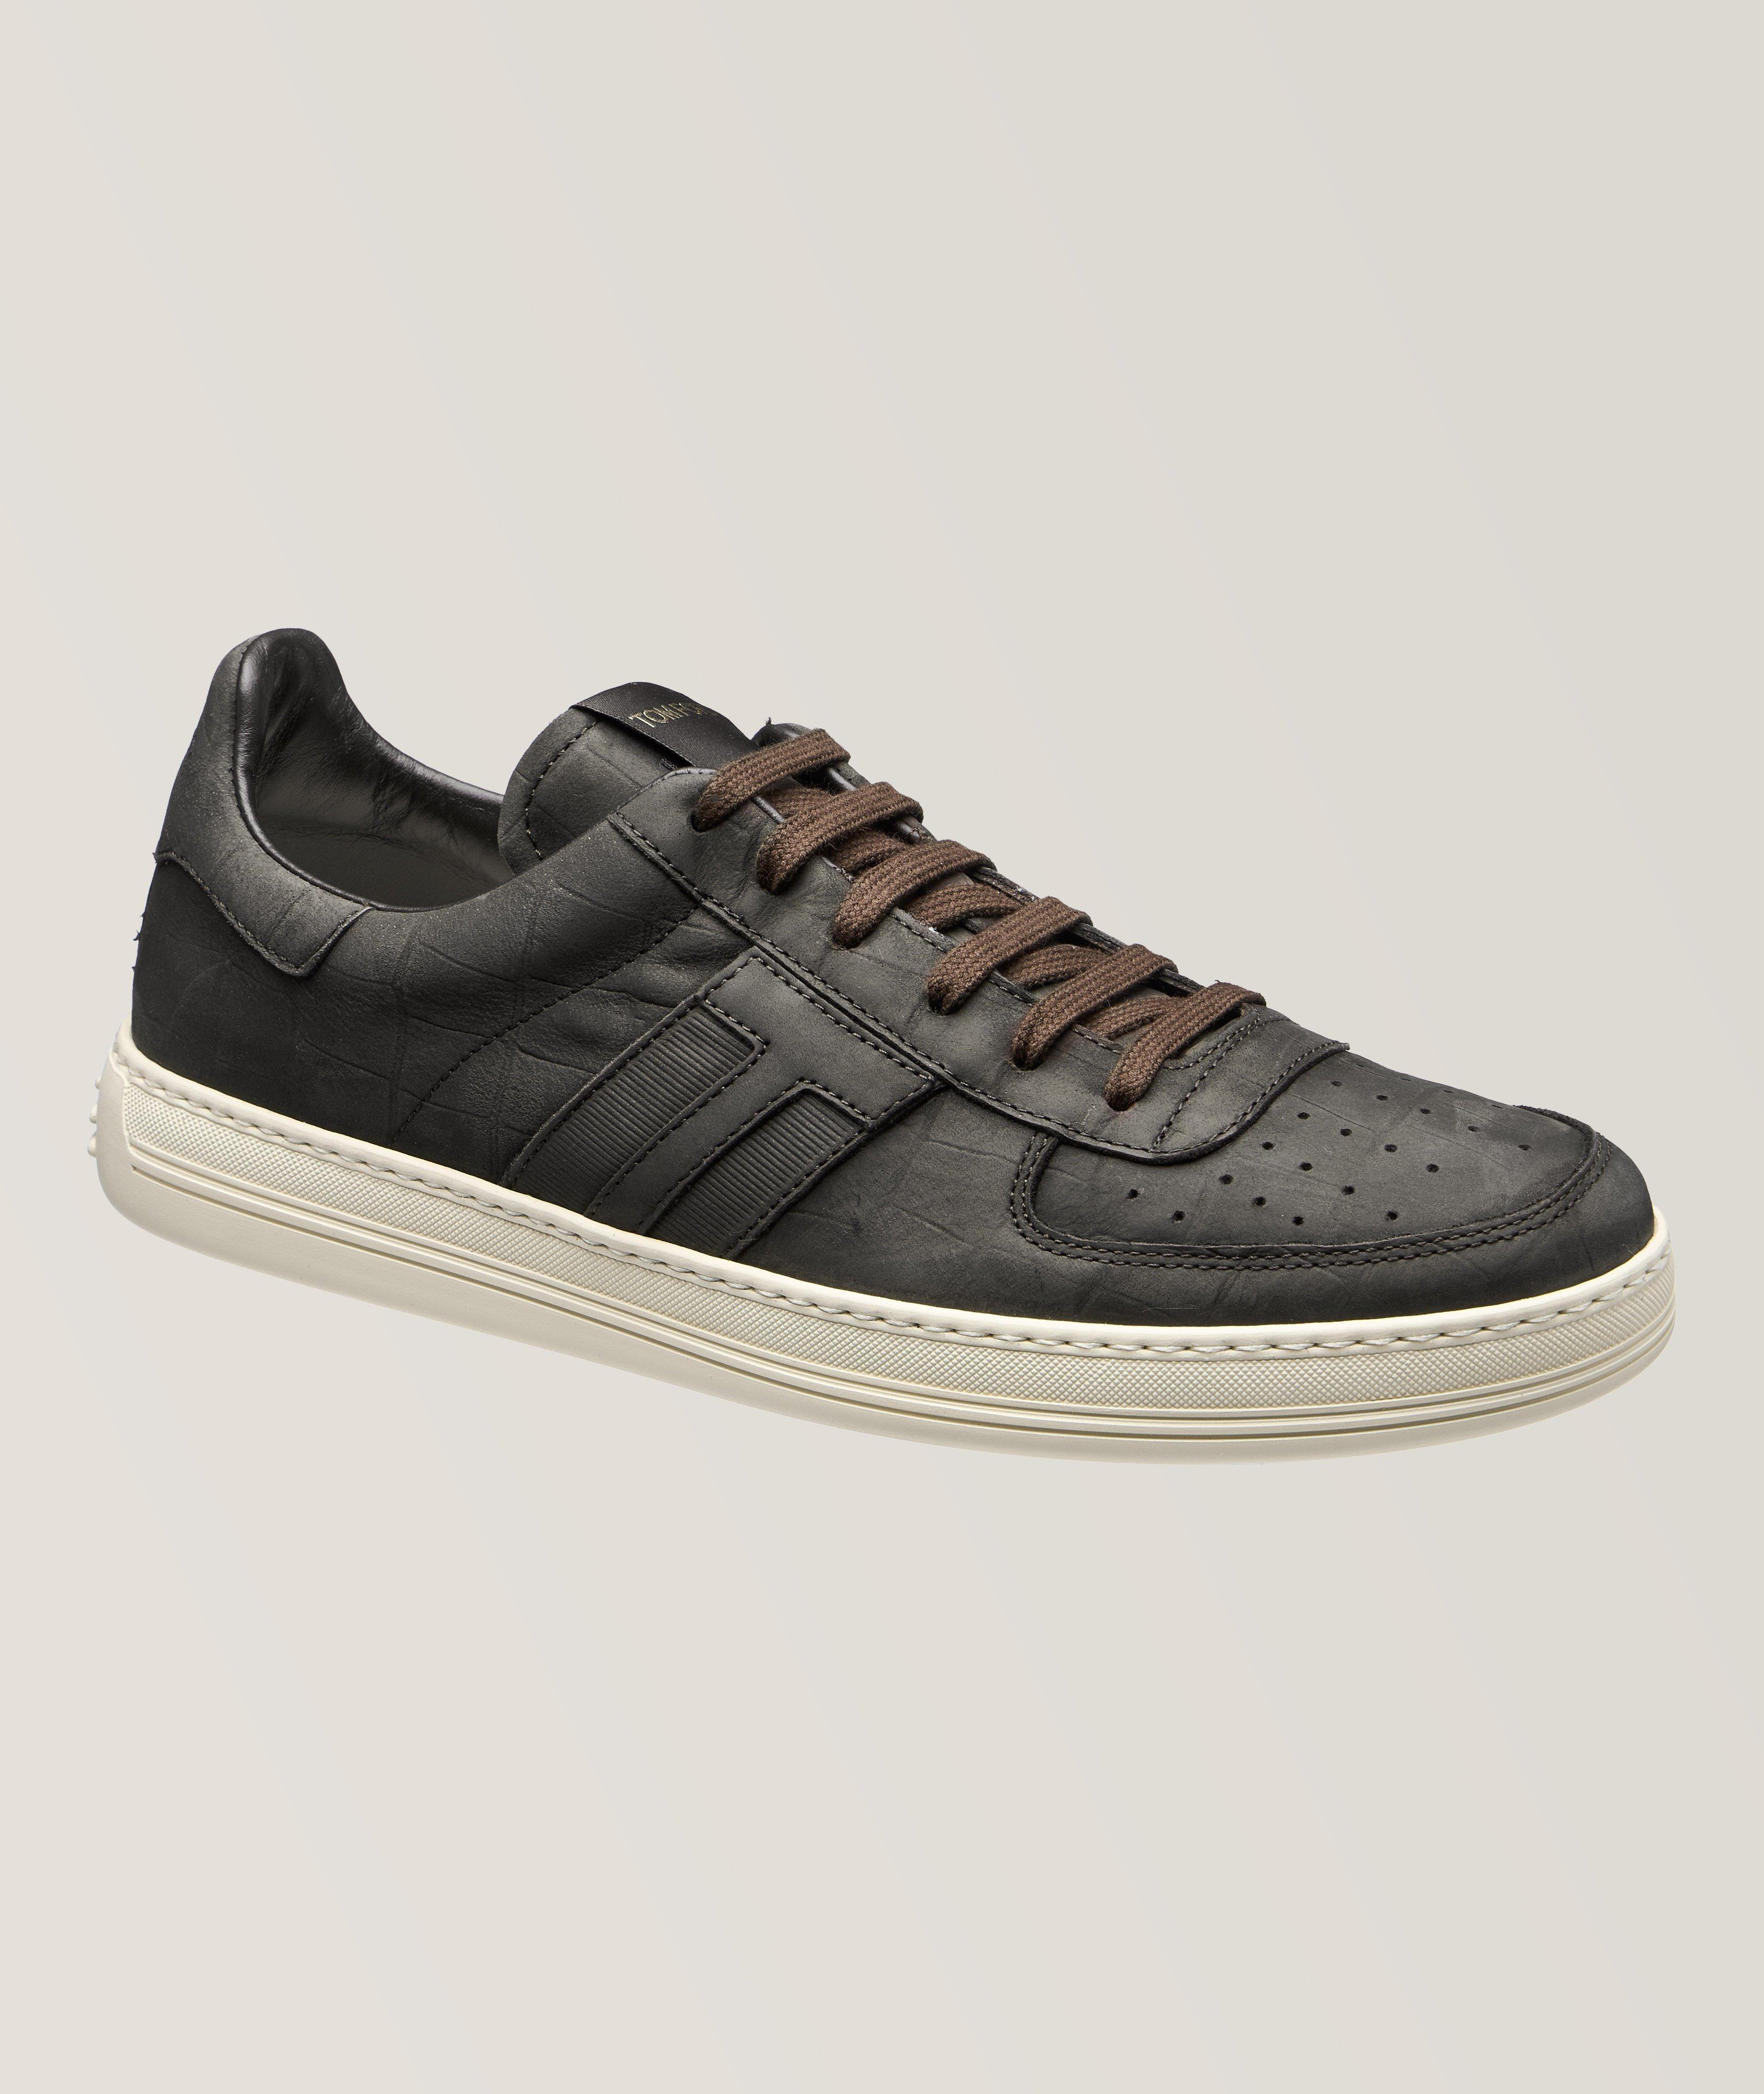 Radcliff Sneakers image 0